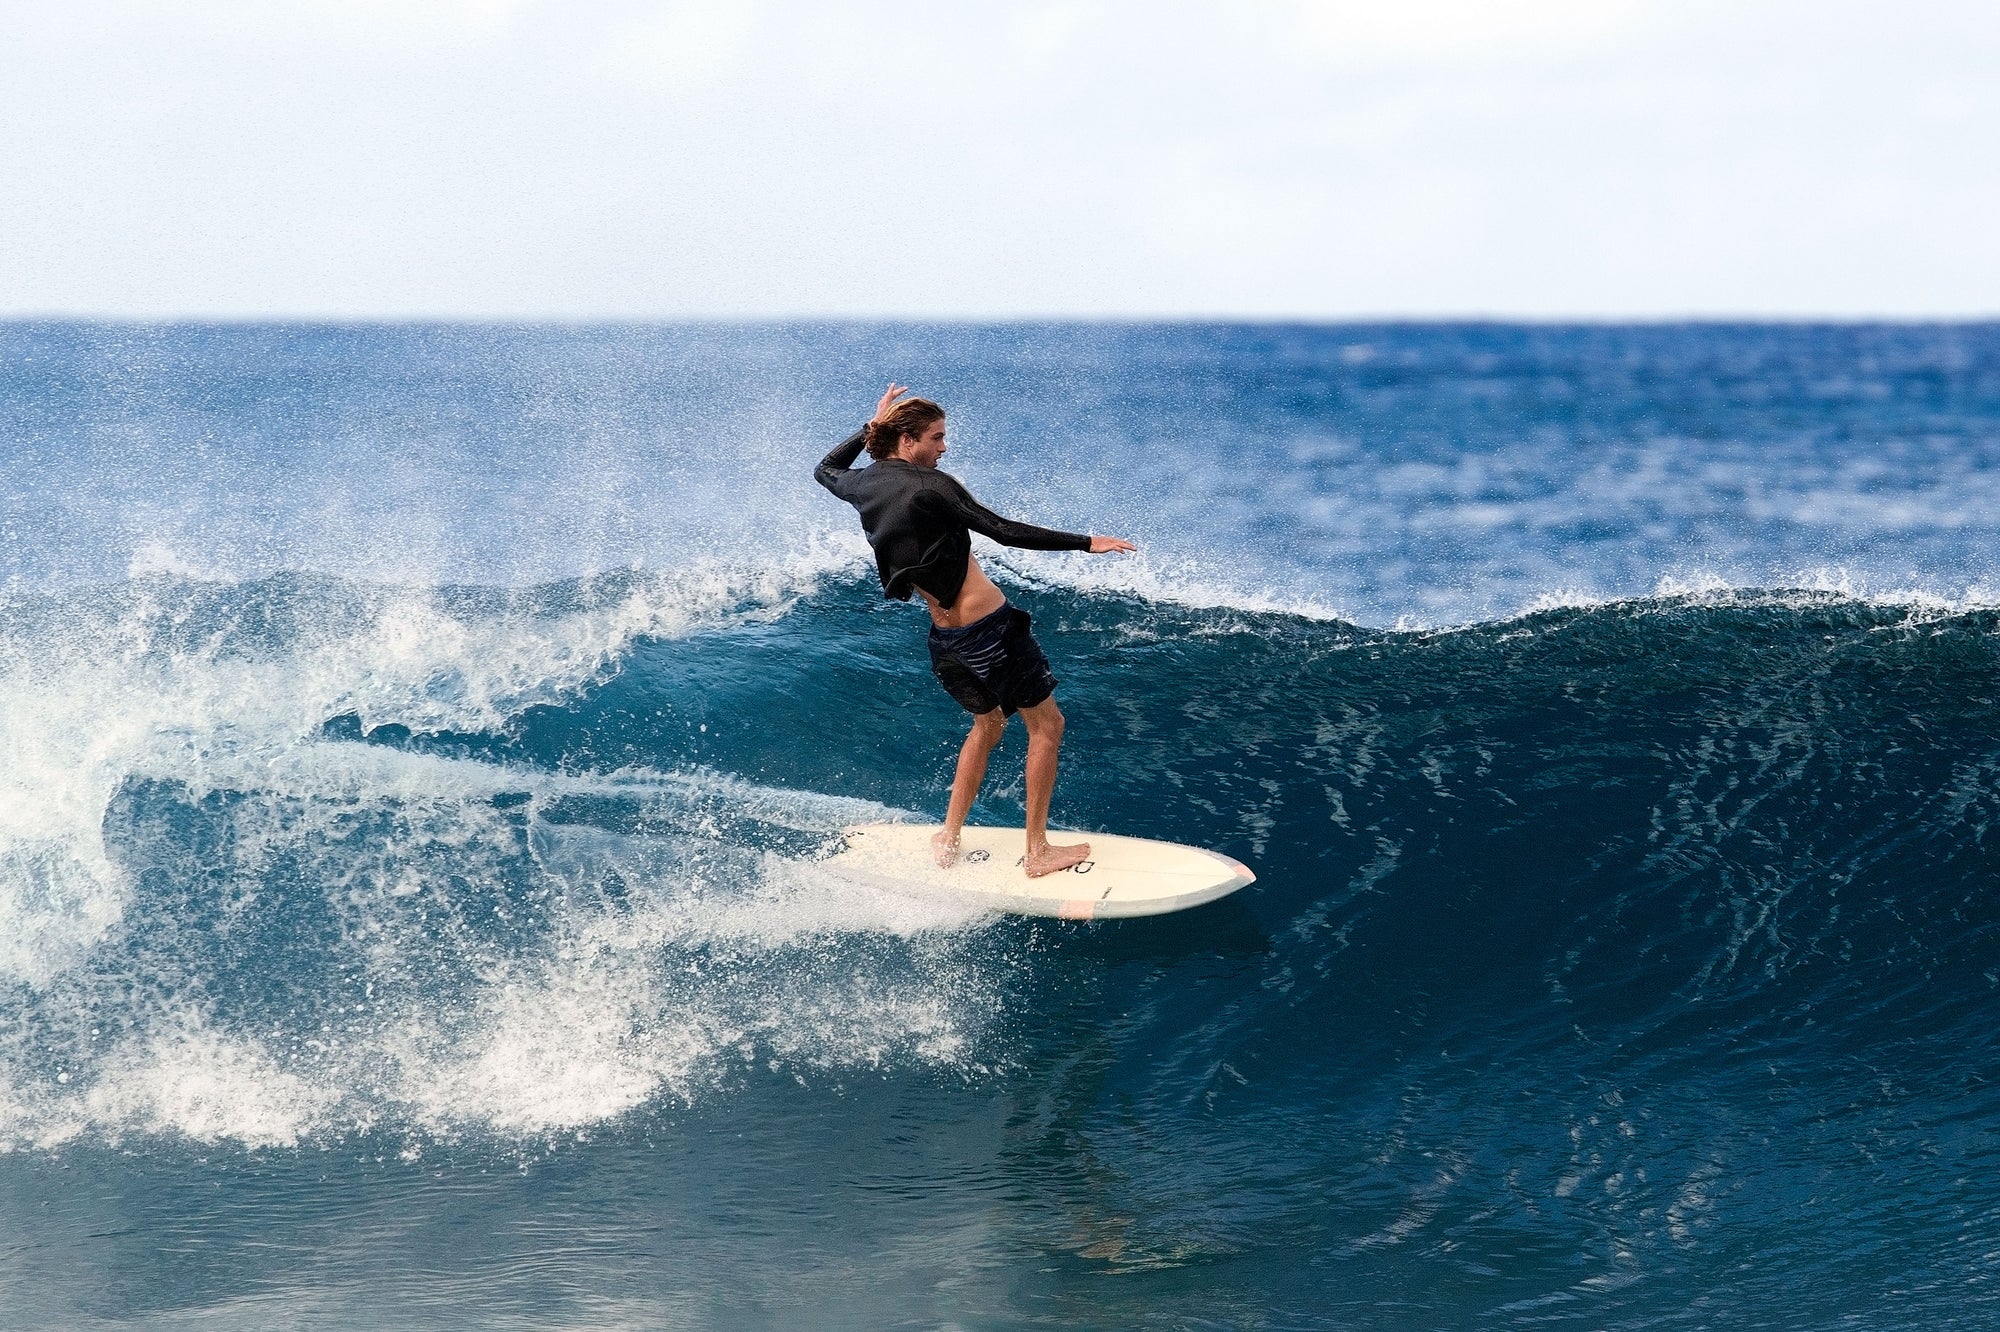 Katin welcomes Surfer Noah Wegrich to the team!